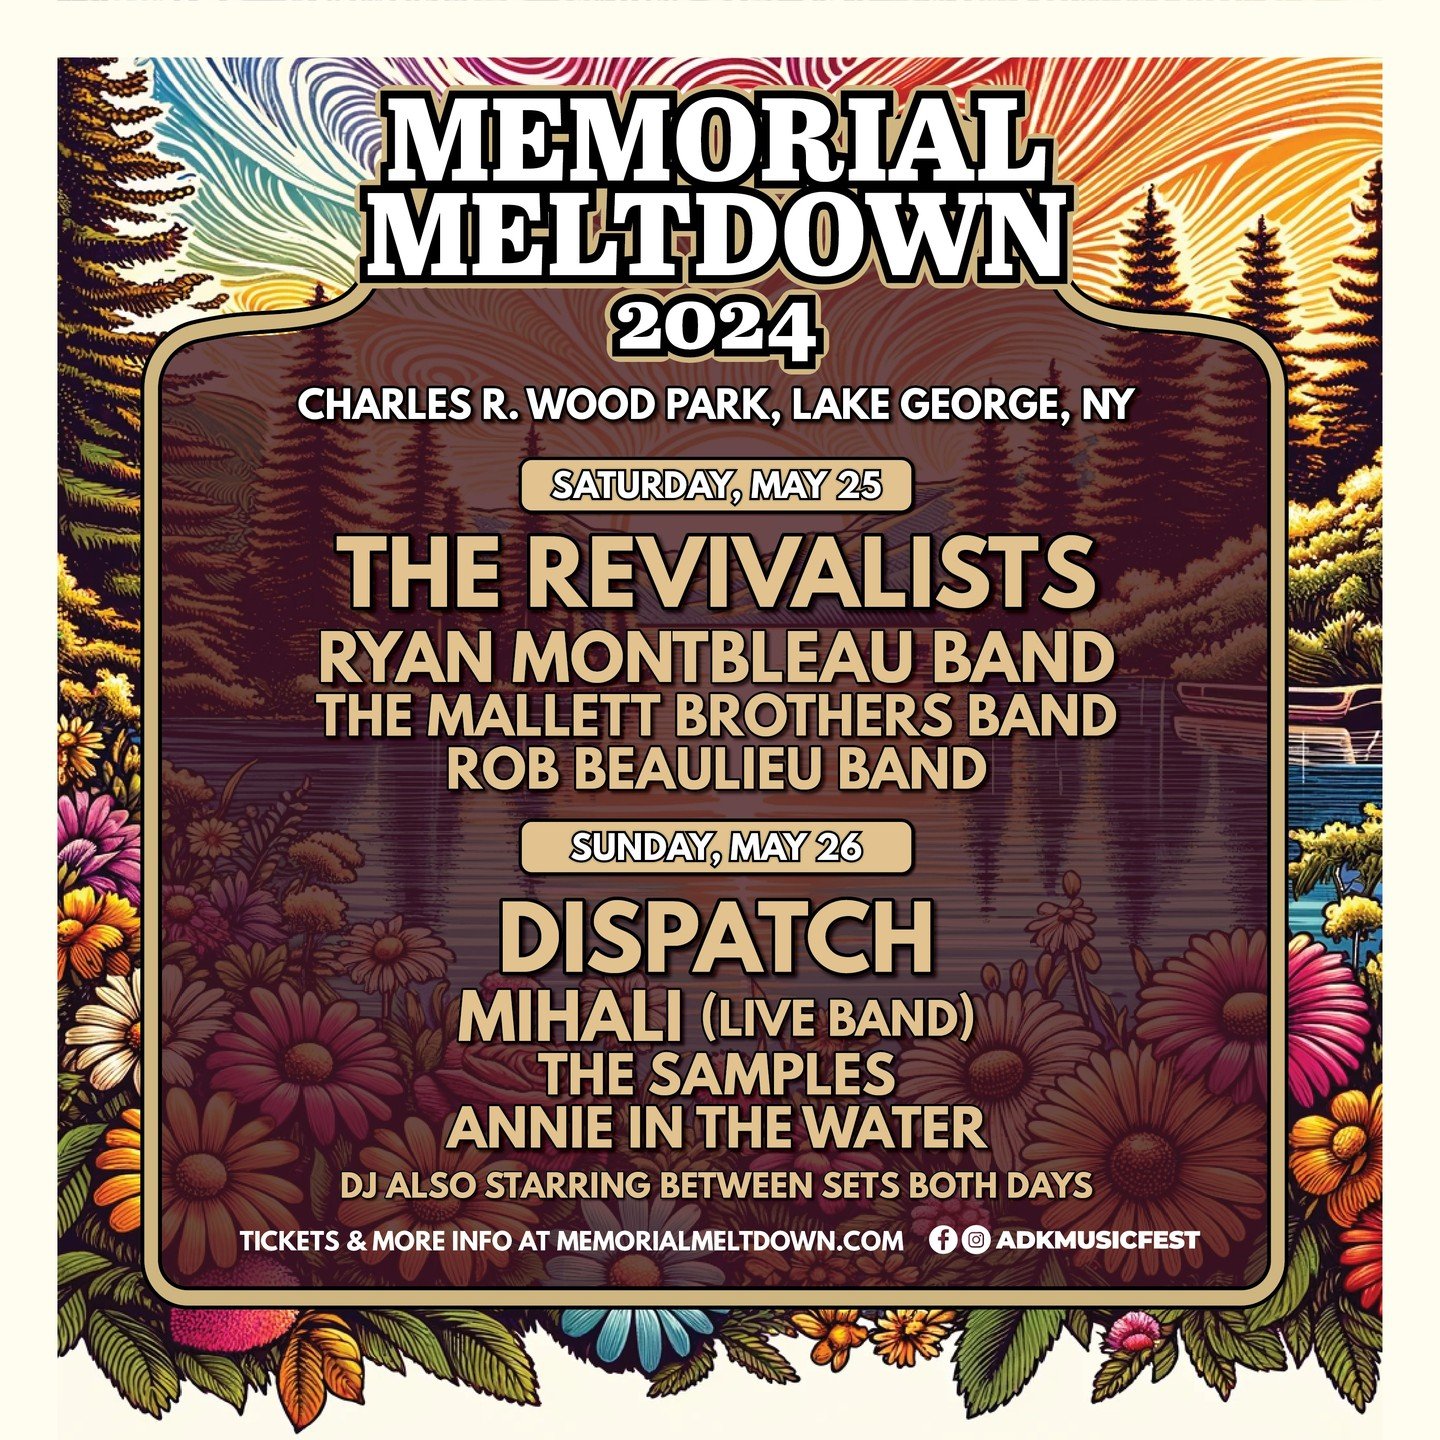 Summer is coming! We are so excited to be on the 2024 Memorial Meltdown! Did you get your tickets and camping spots yet? Let's party in Lake George! #memorialdayweekend #LiveMusicExperience #festivalseason #campingtrip